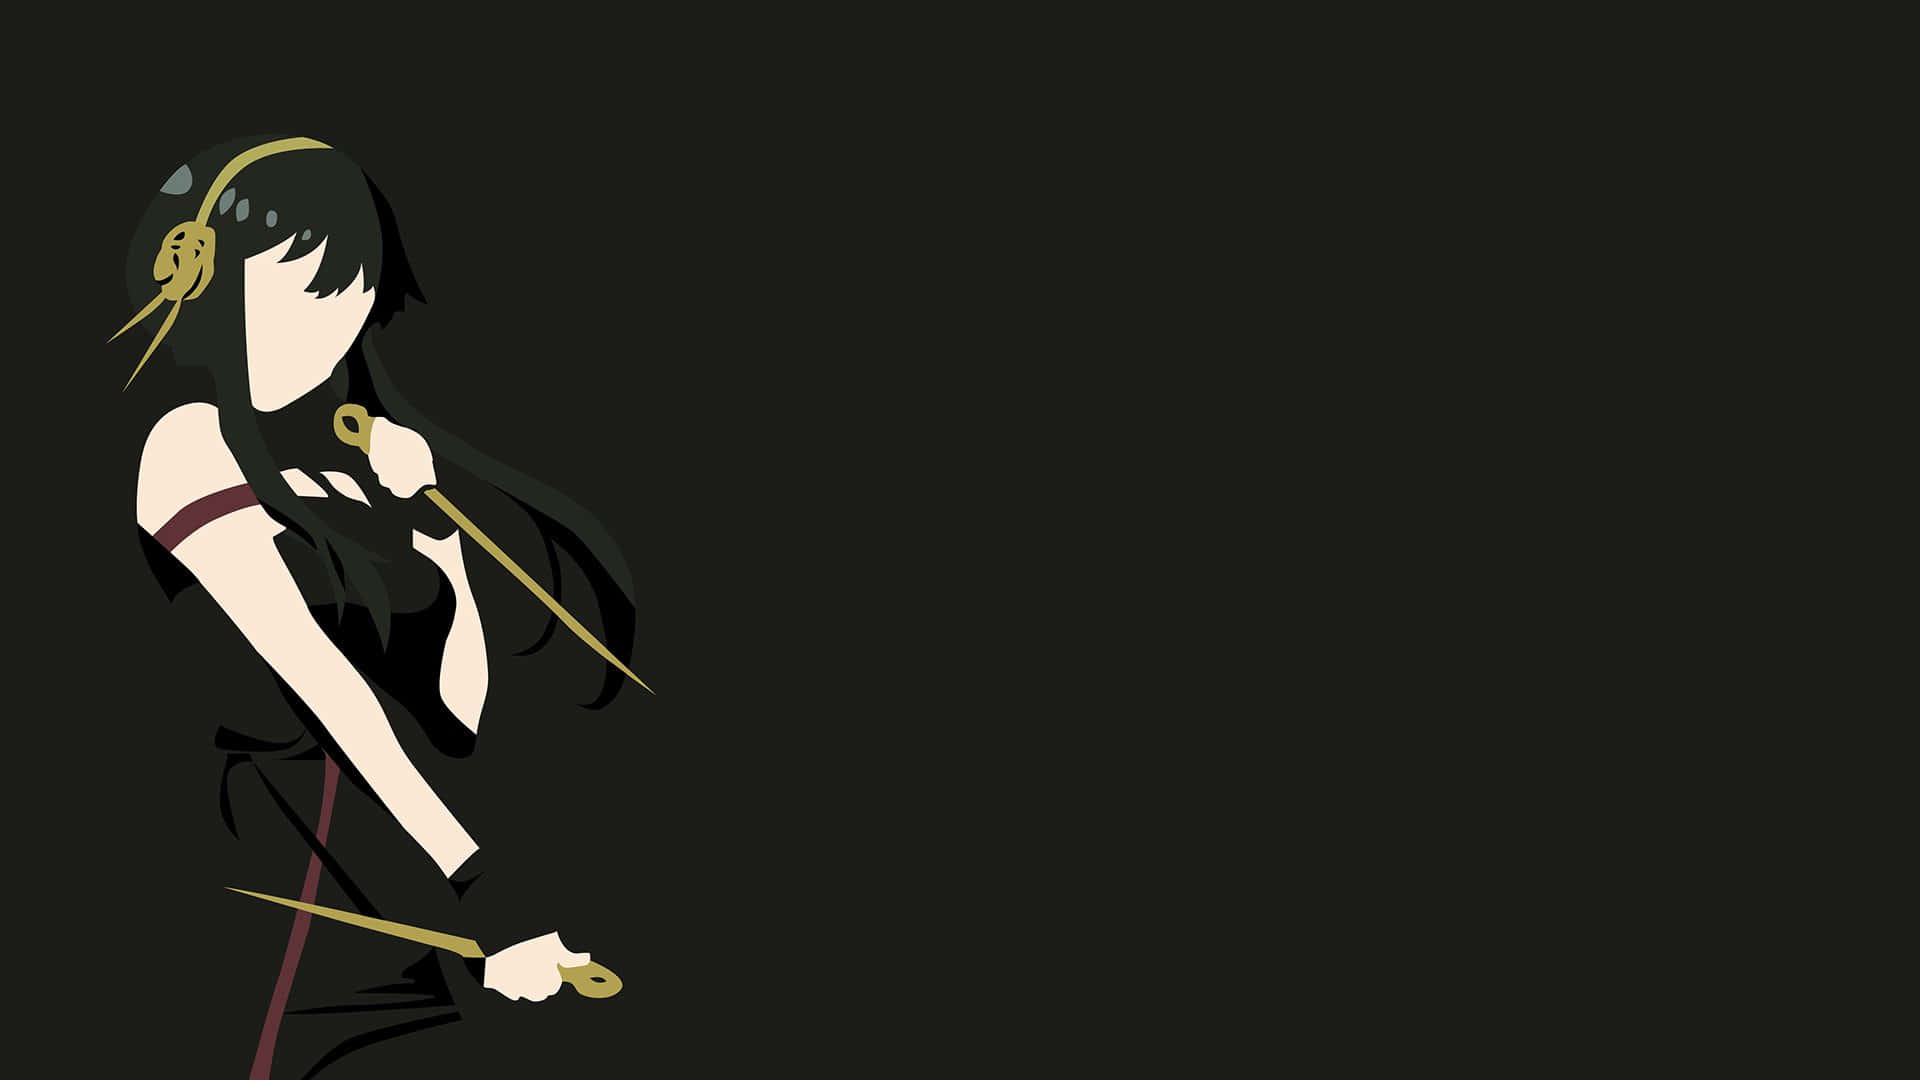 A Girl With Long Hair And Black Dress Holding A Sword Wallpaper